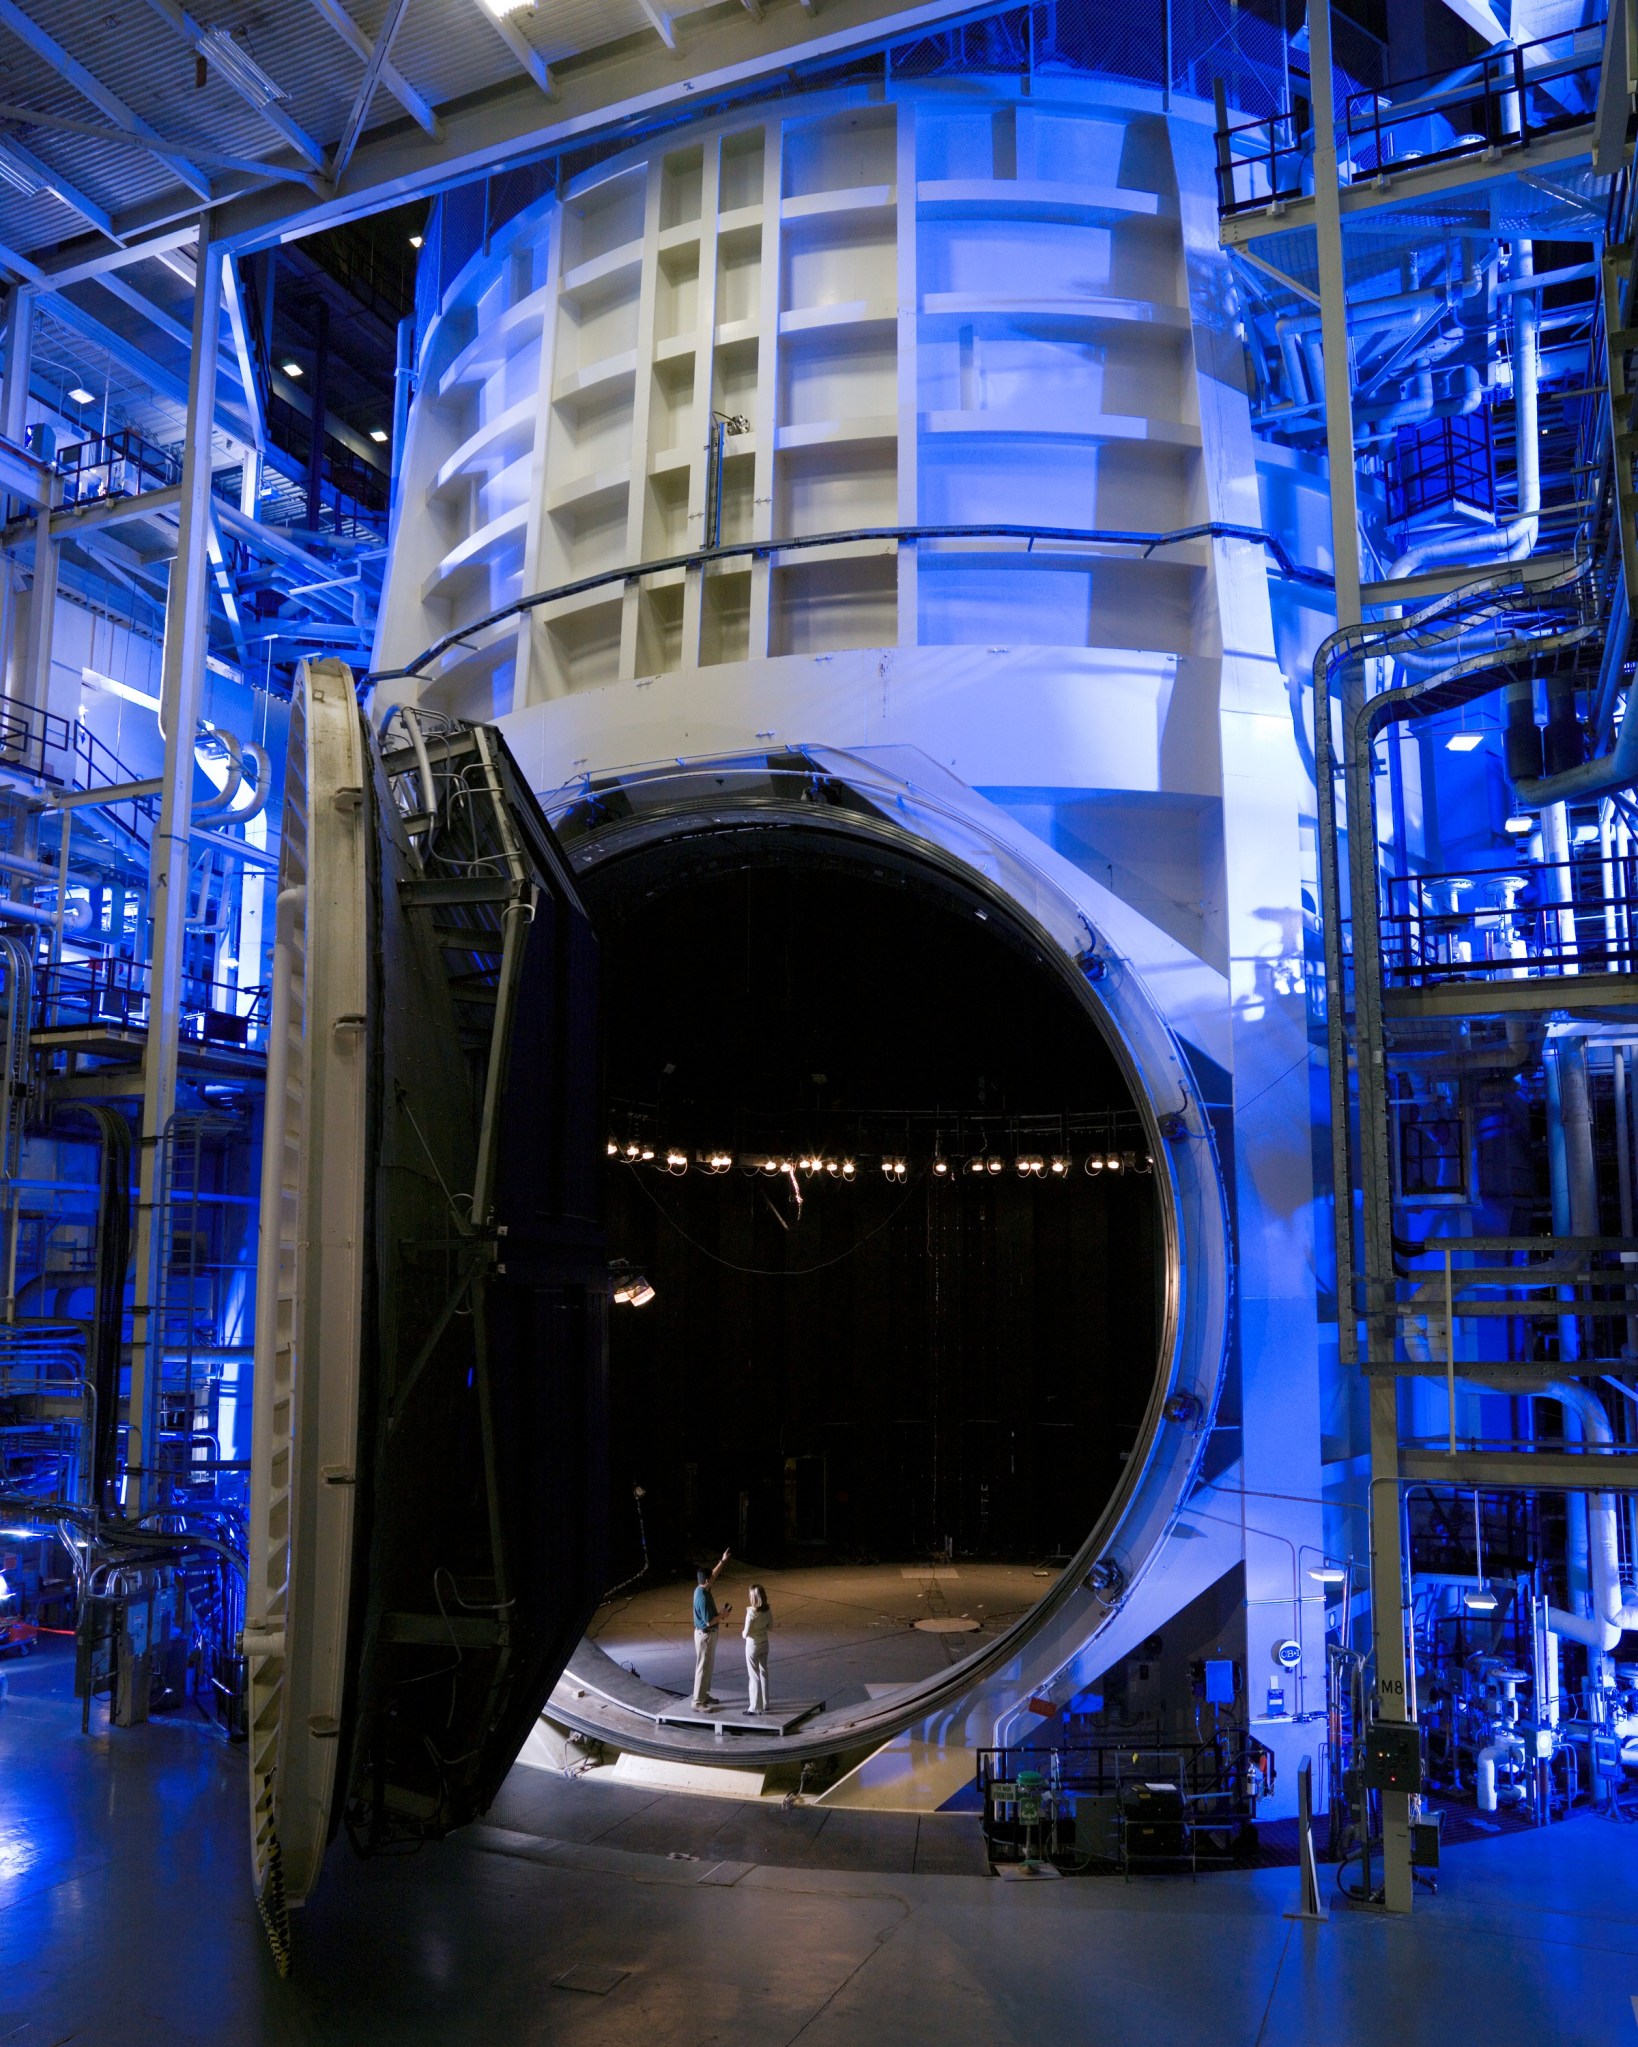 View of Johnson Space Center's Thermal Vacuum Chamber A with its gigantic door open.